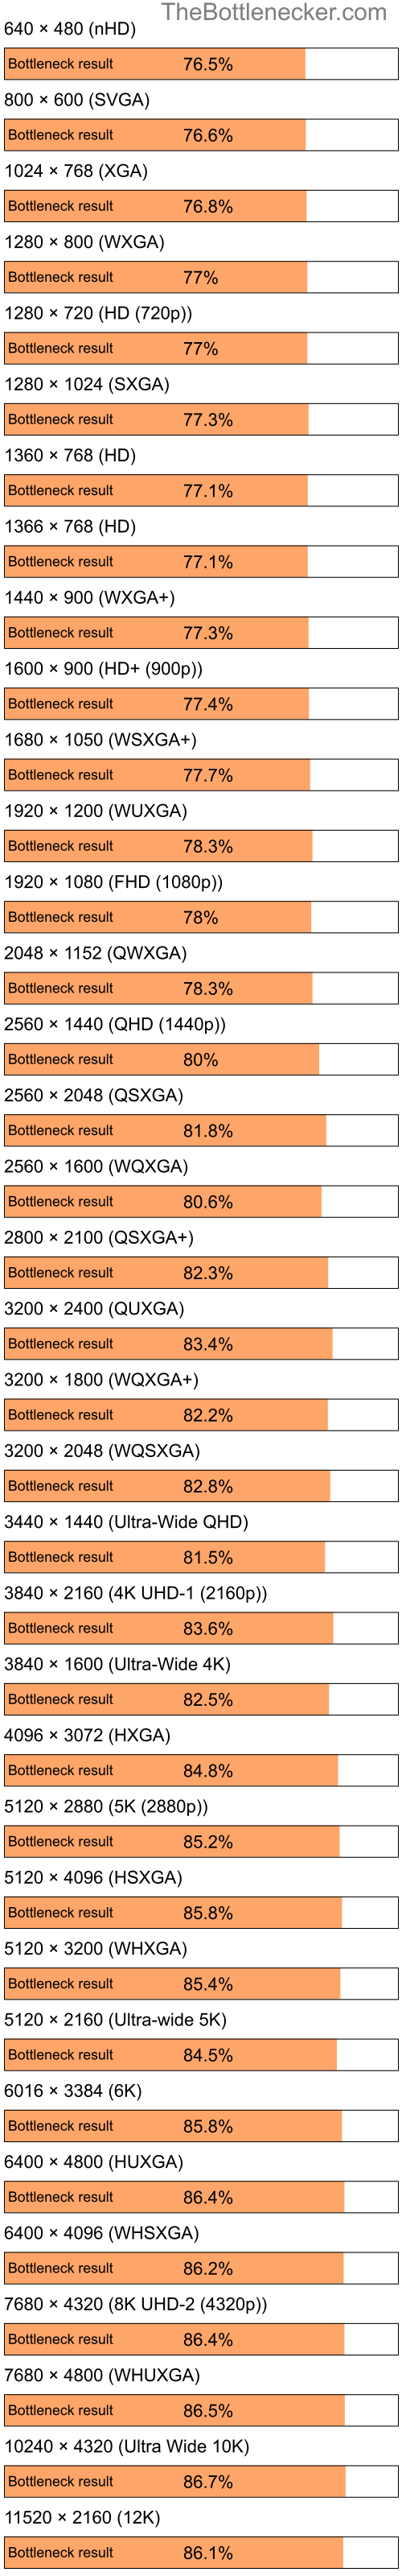 Bottleneck results by resolution for Intel Celeron and Intel G33 in Graphic Card Intense Tasks